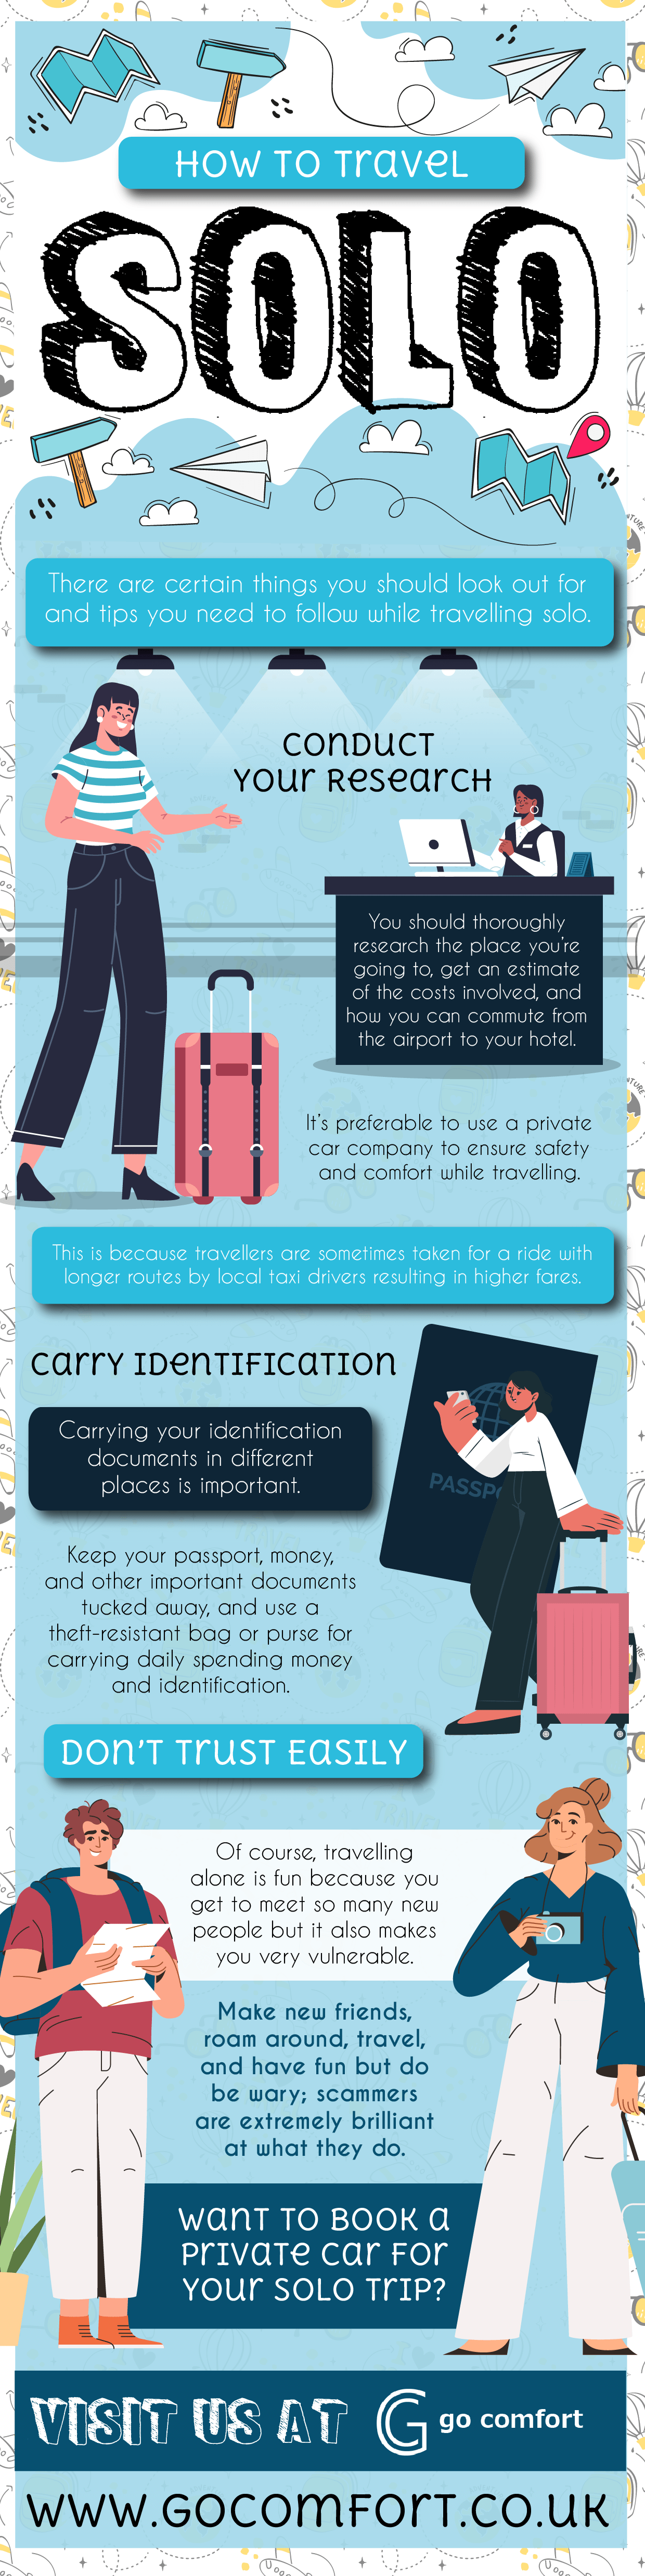 How to travel solo